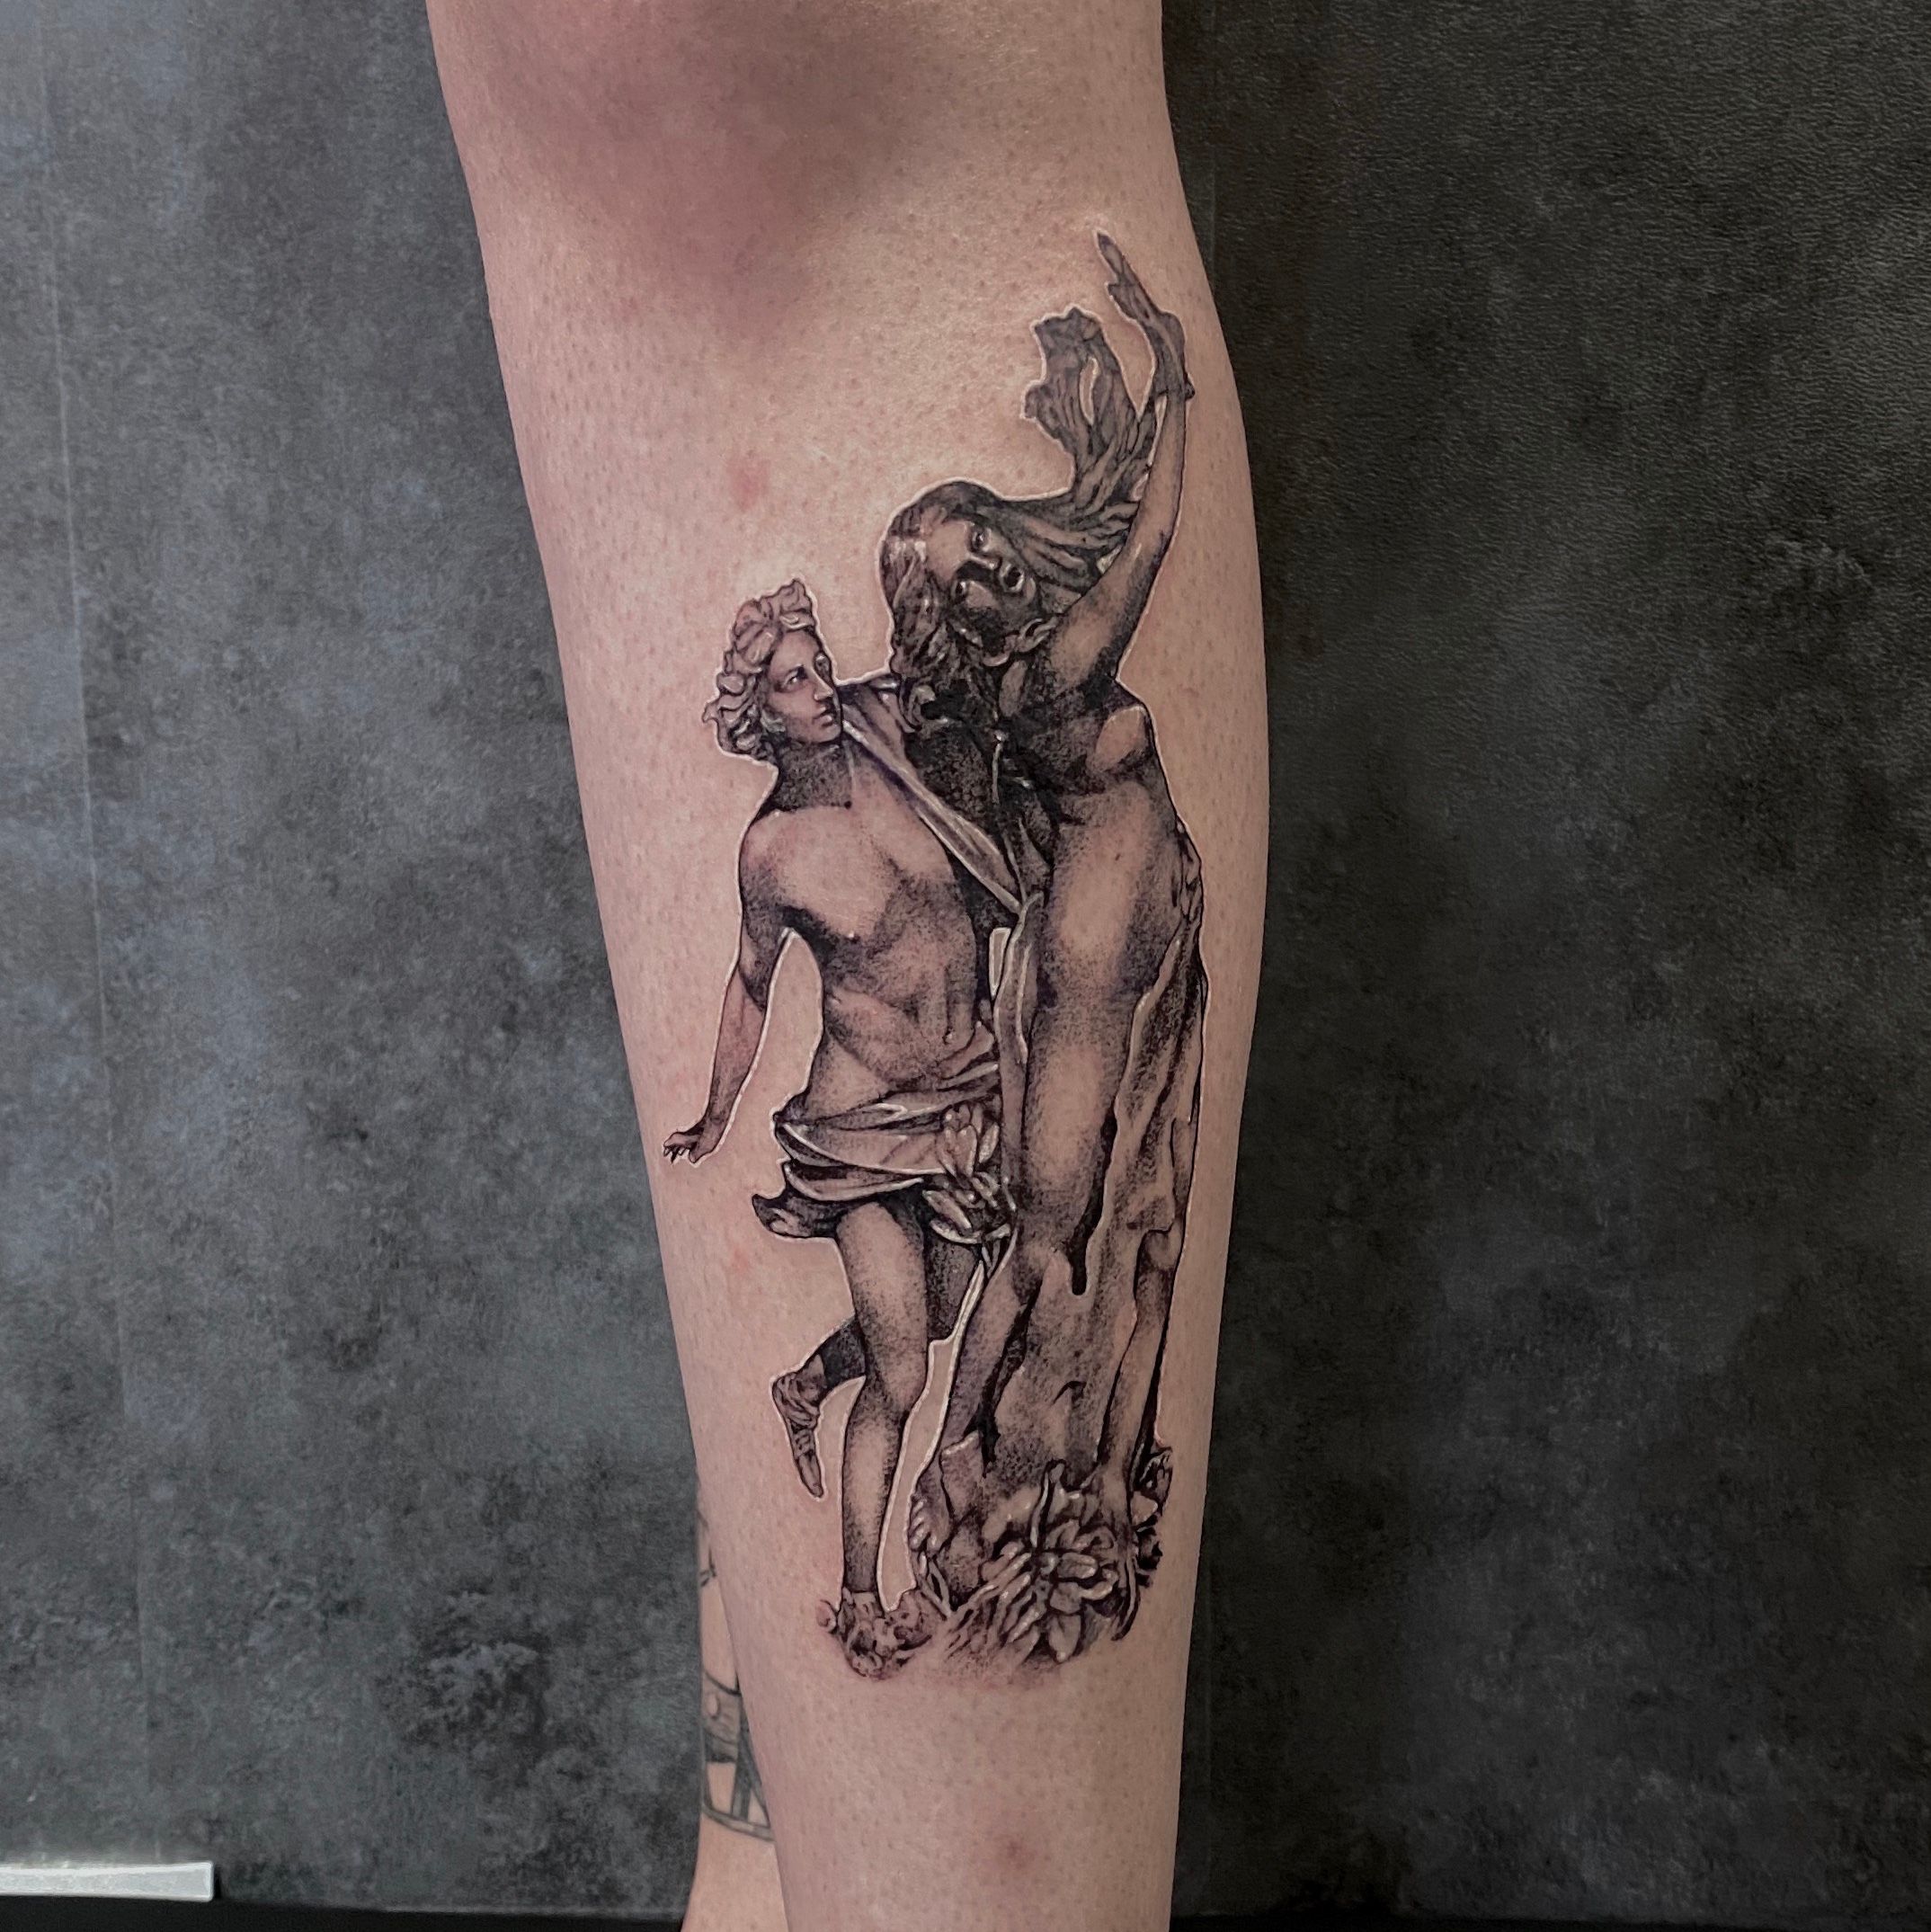 Artemis and Apollo by Lil D at Timeless Tattoo in Atlanta GA  rtattoos